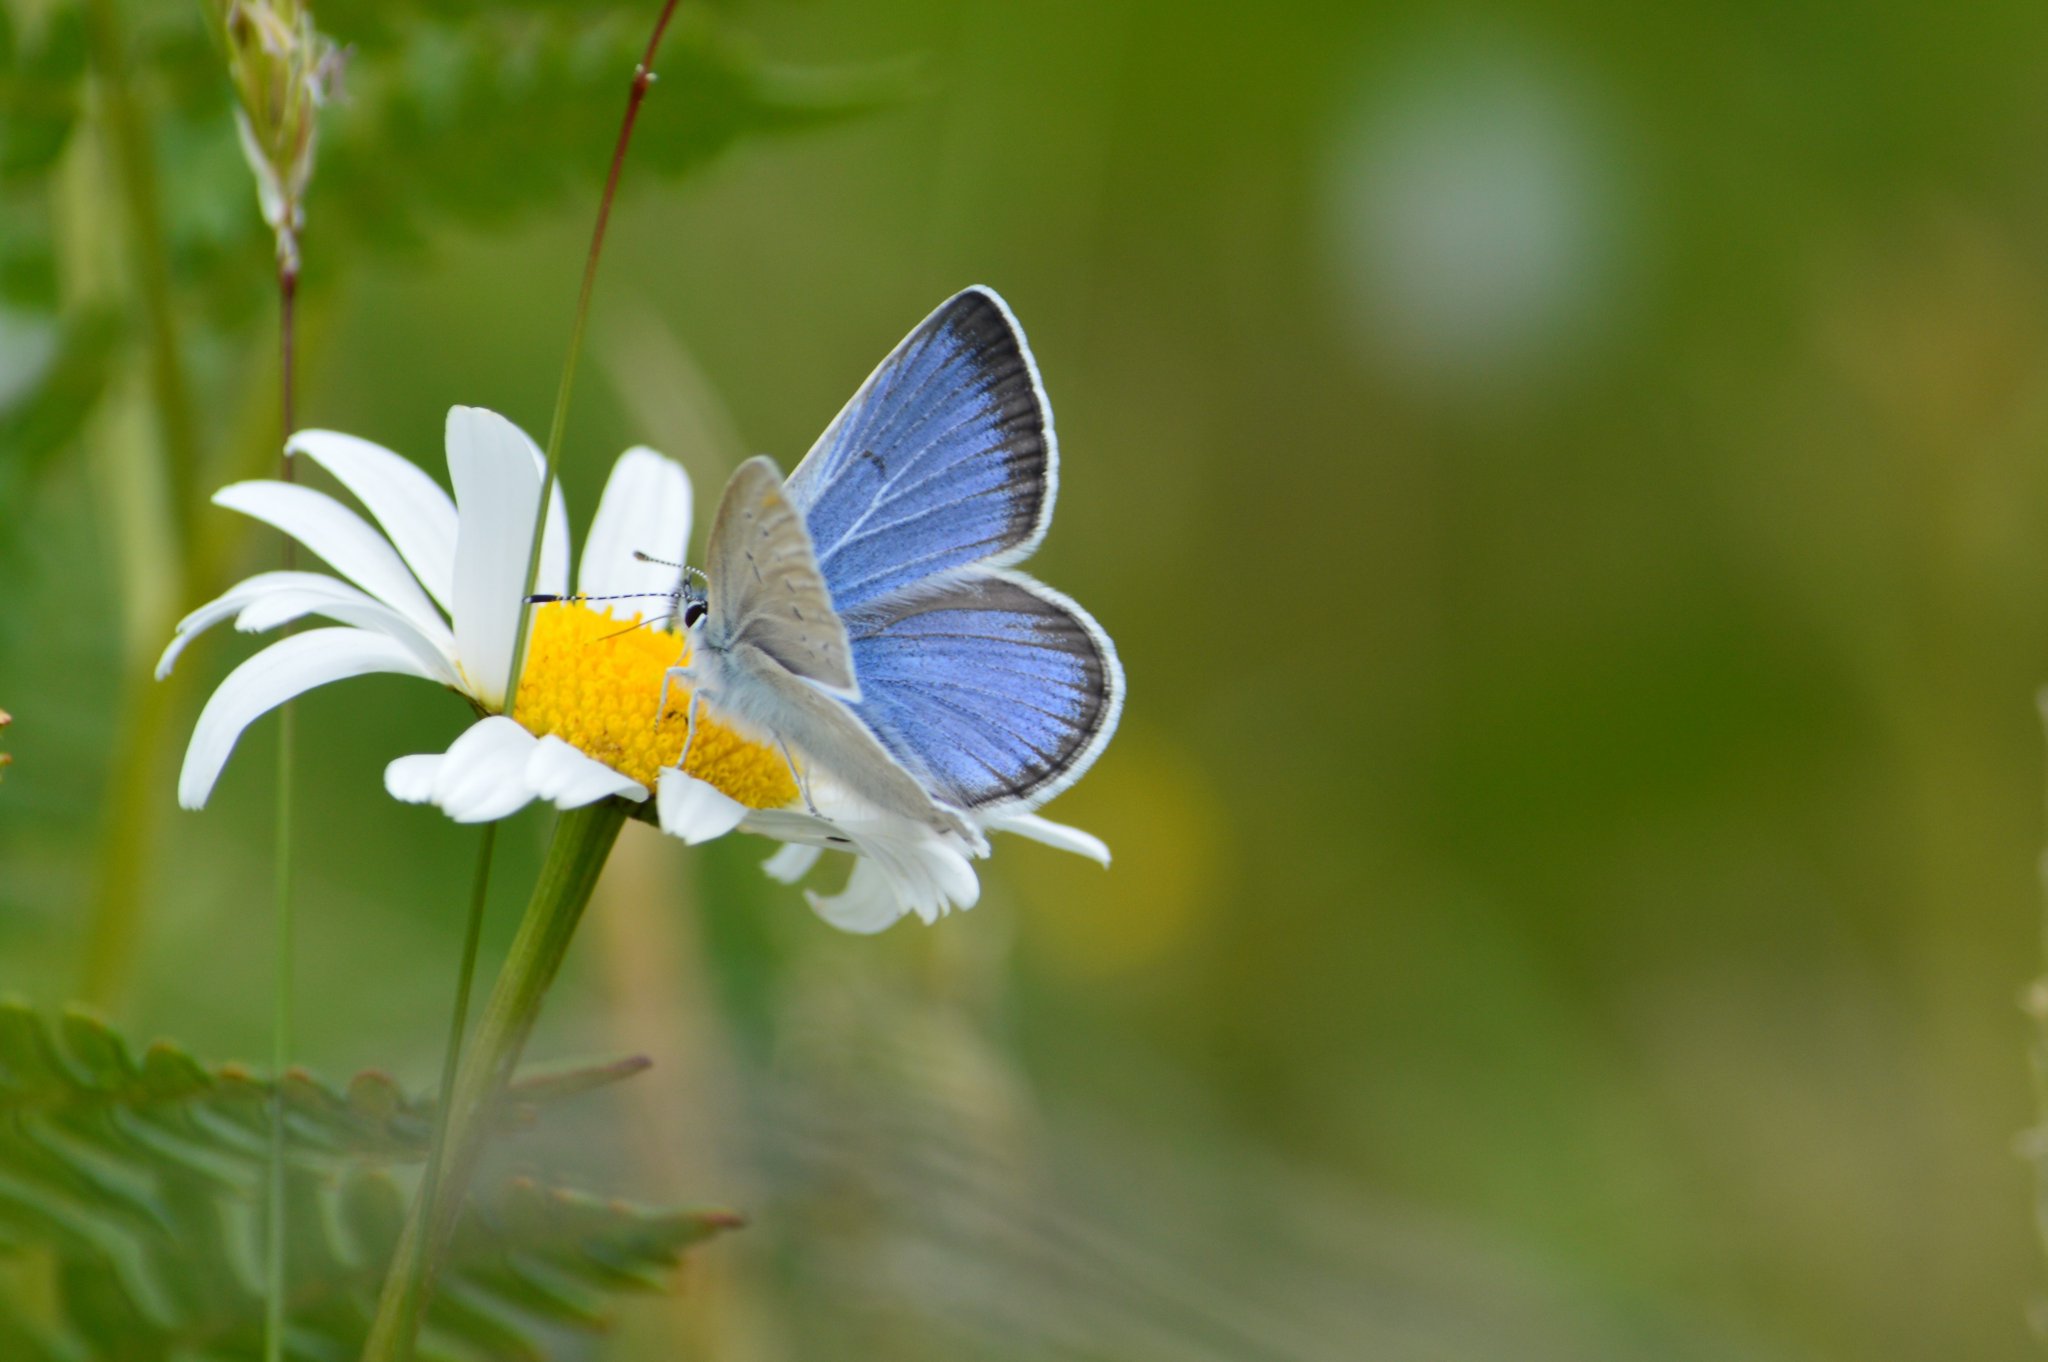 Resting on a single-stemmed white flower with a yellow center, a butterfly shows its wings that are blue and black on top and white-gray on the underside.